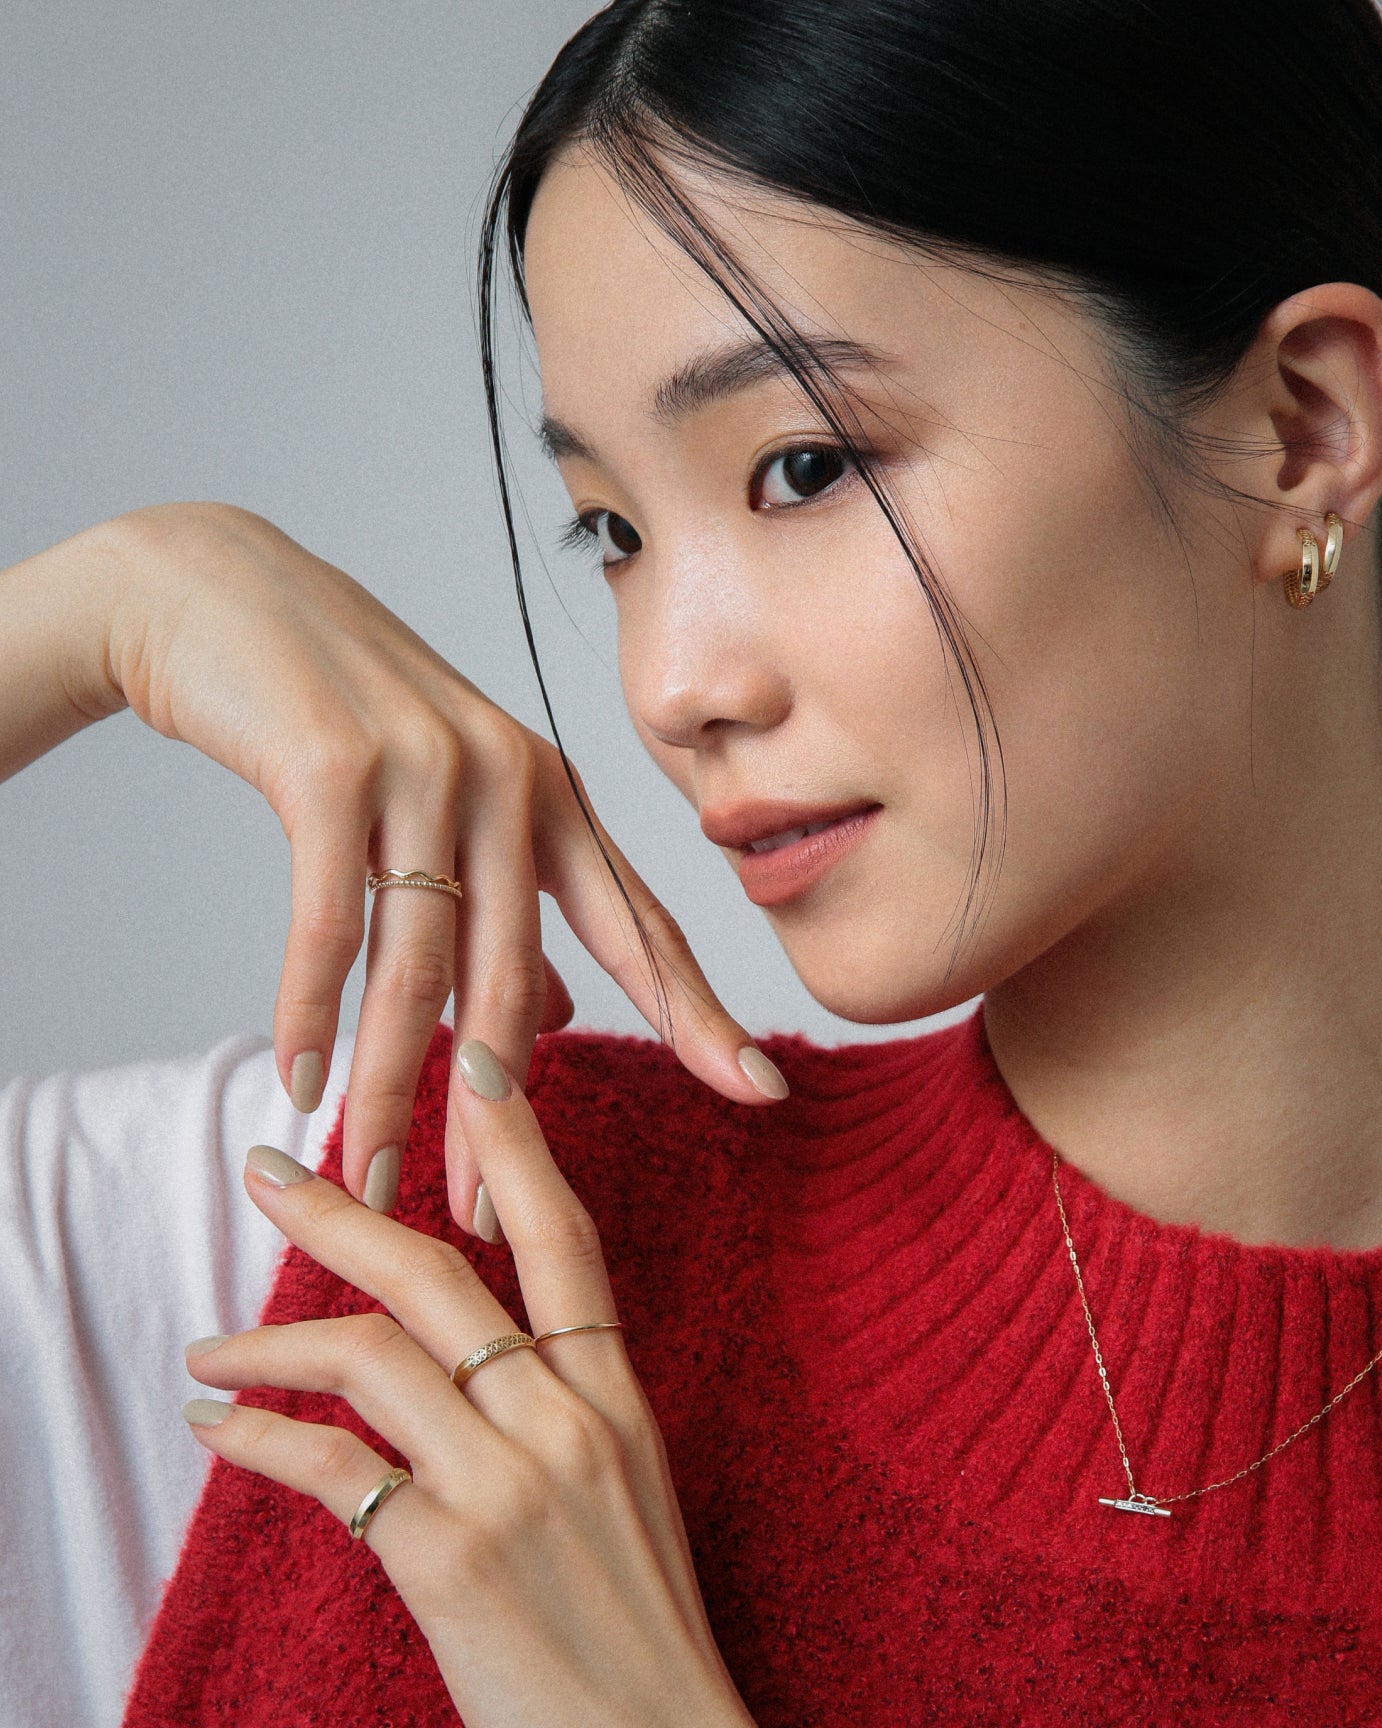 X bamboo stacking ring B<br>クロス バンブー スタッキング リング B